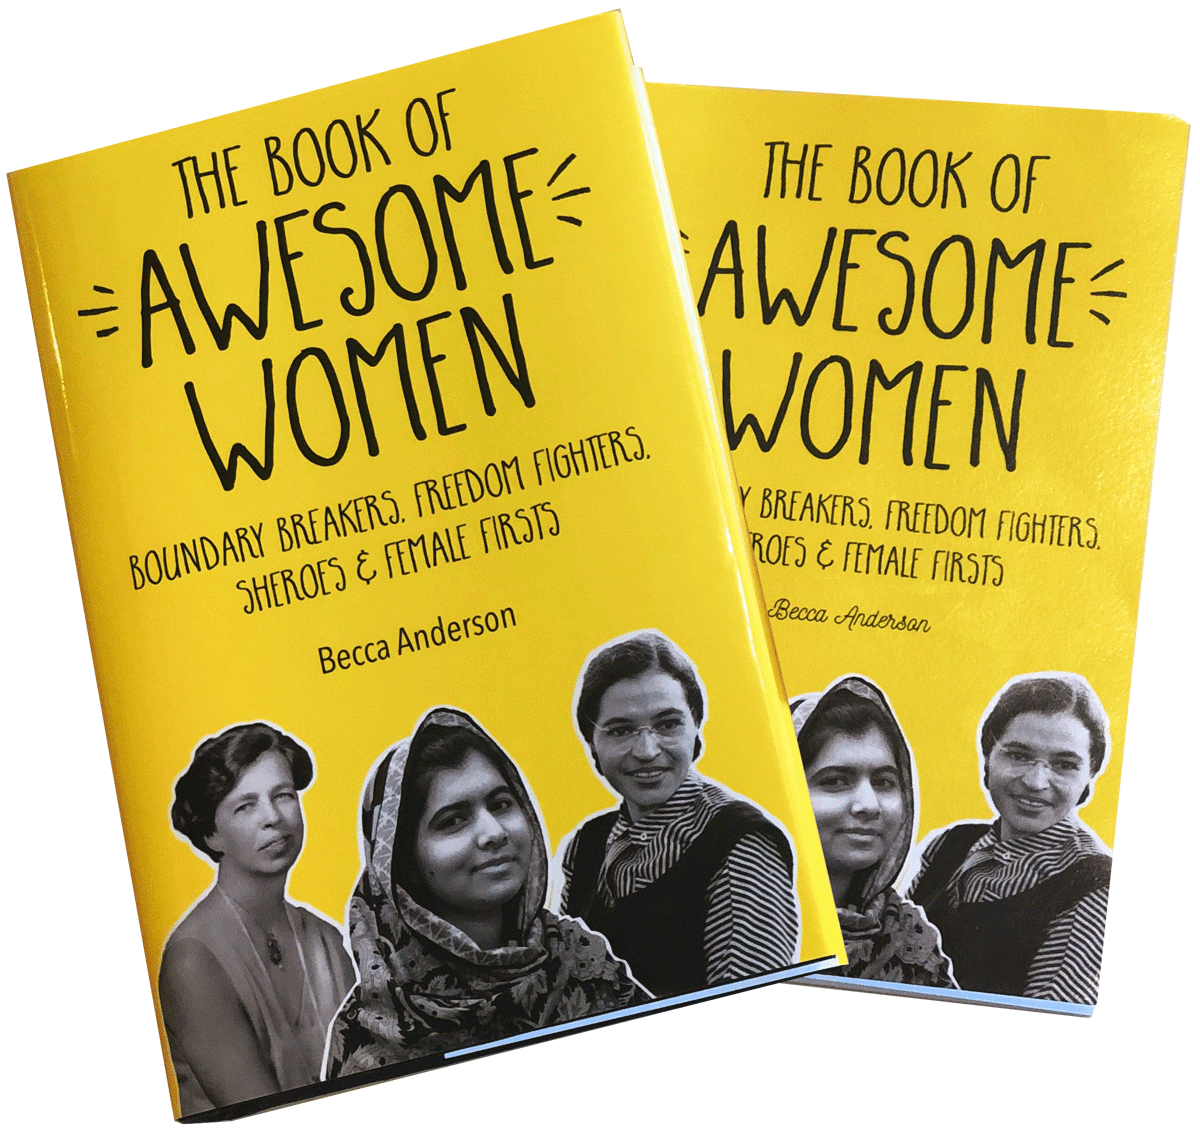 Cover of Book "The Book of Awesome Women"; yellow book cover with three women in black-and-white on it